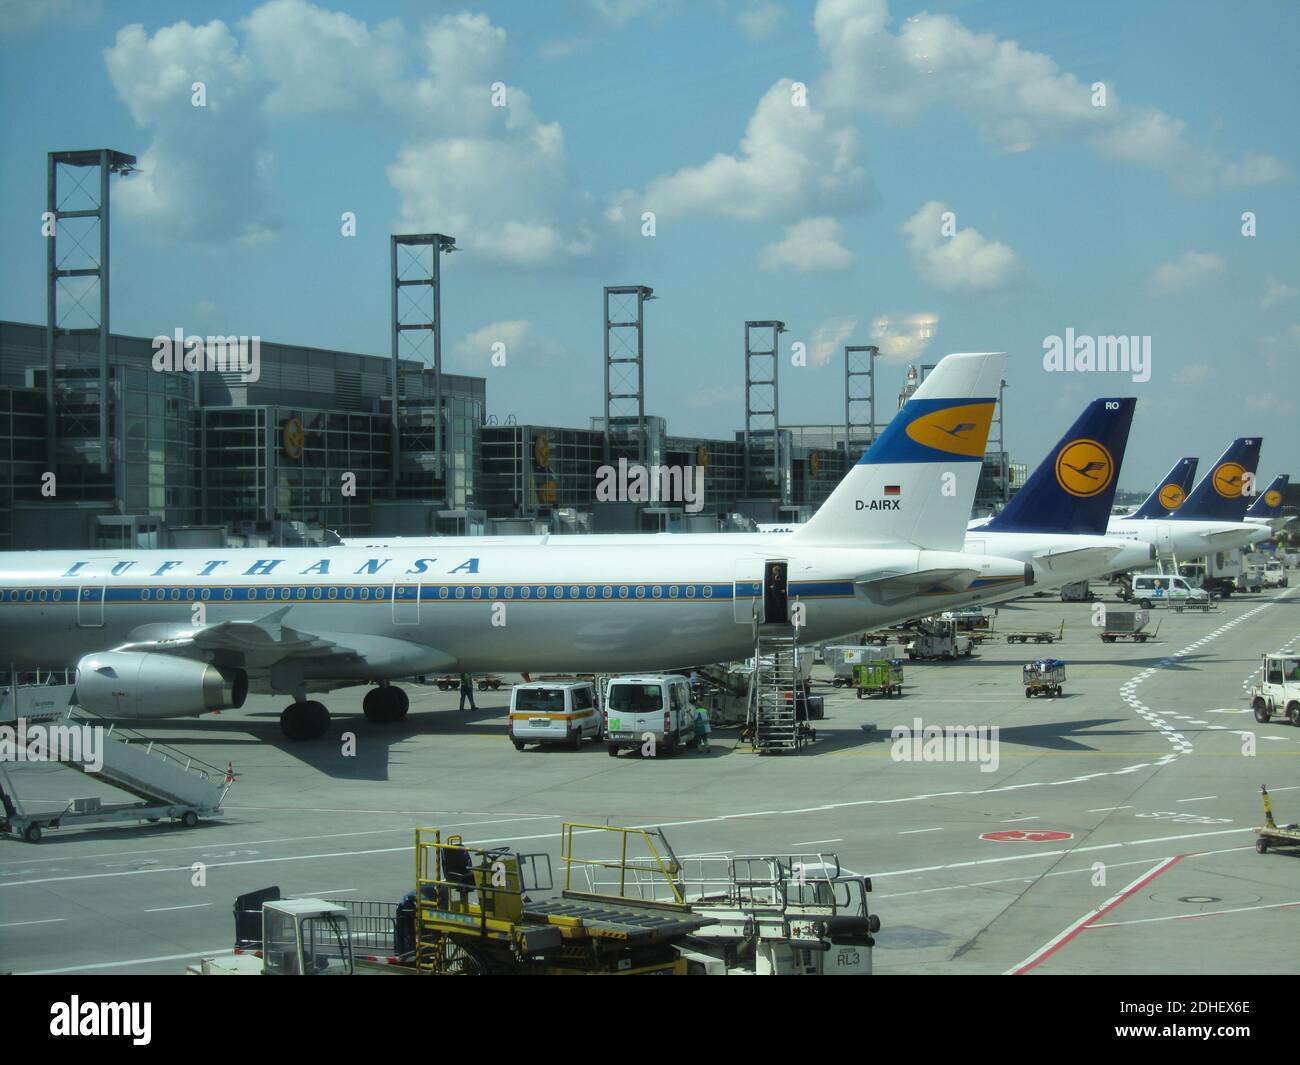 FRANKFURT, GERMANY - Jul 11, 2011: Frankfurt Airport, Terminal 1, Pier A. Fully utilized 2011. An aircraft with retro livery in front. Stock Photo